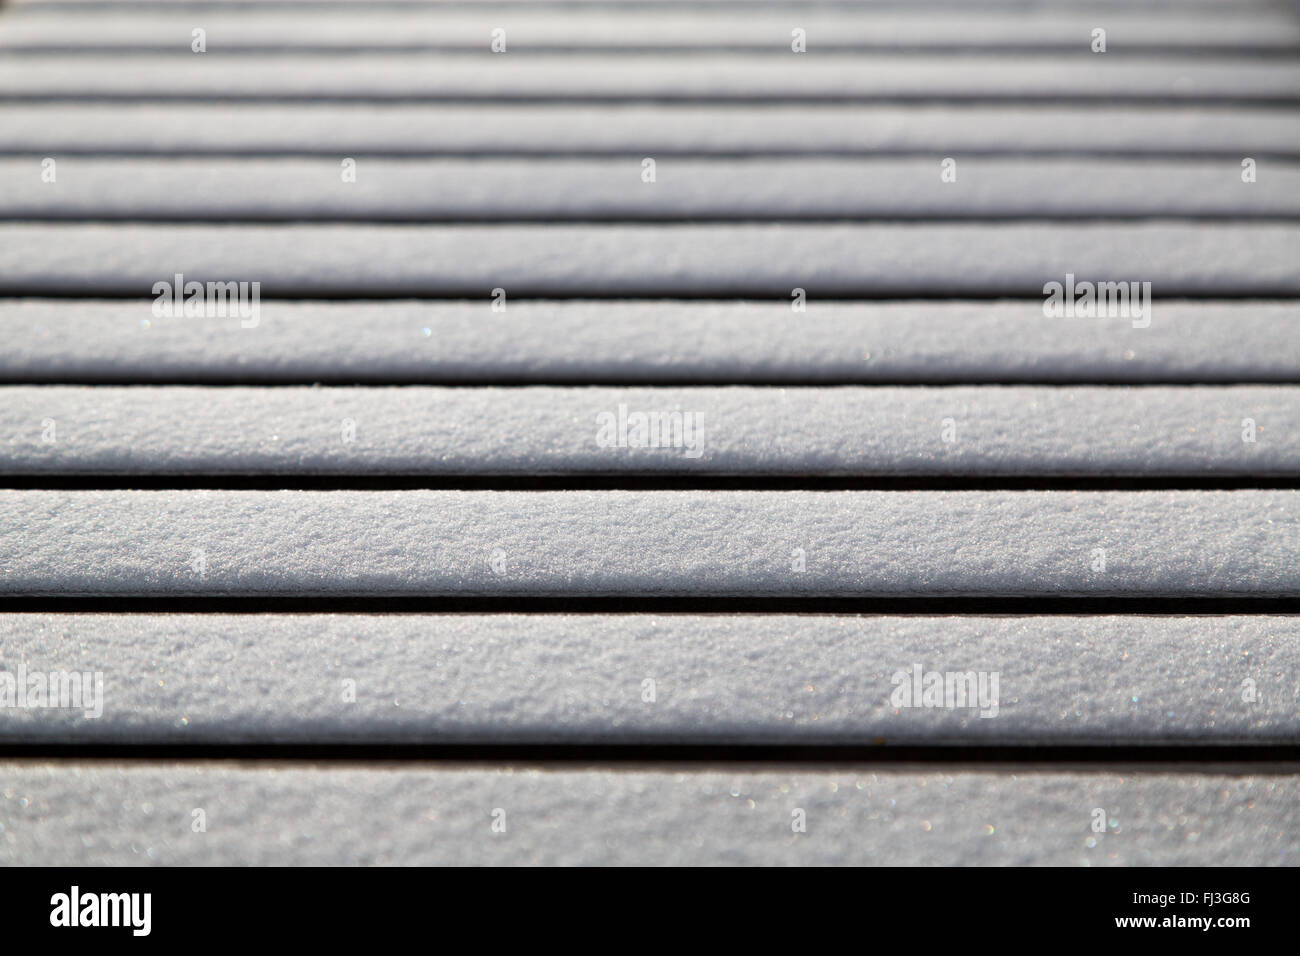 Abstract of snow on bench with only one slat in focus Stock Photo